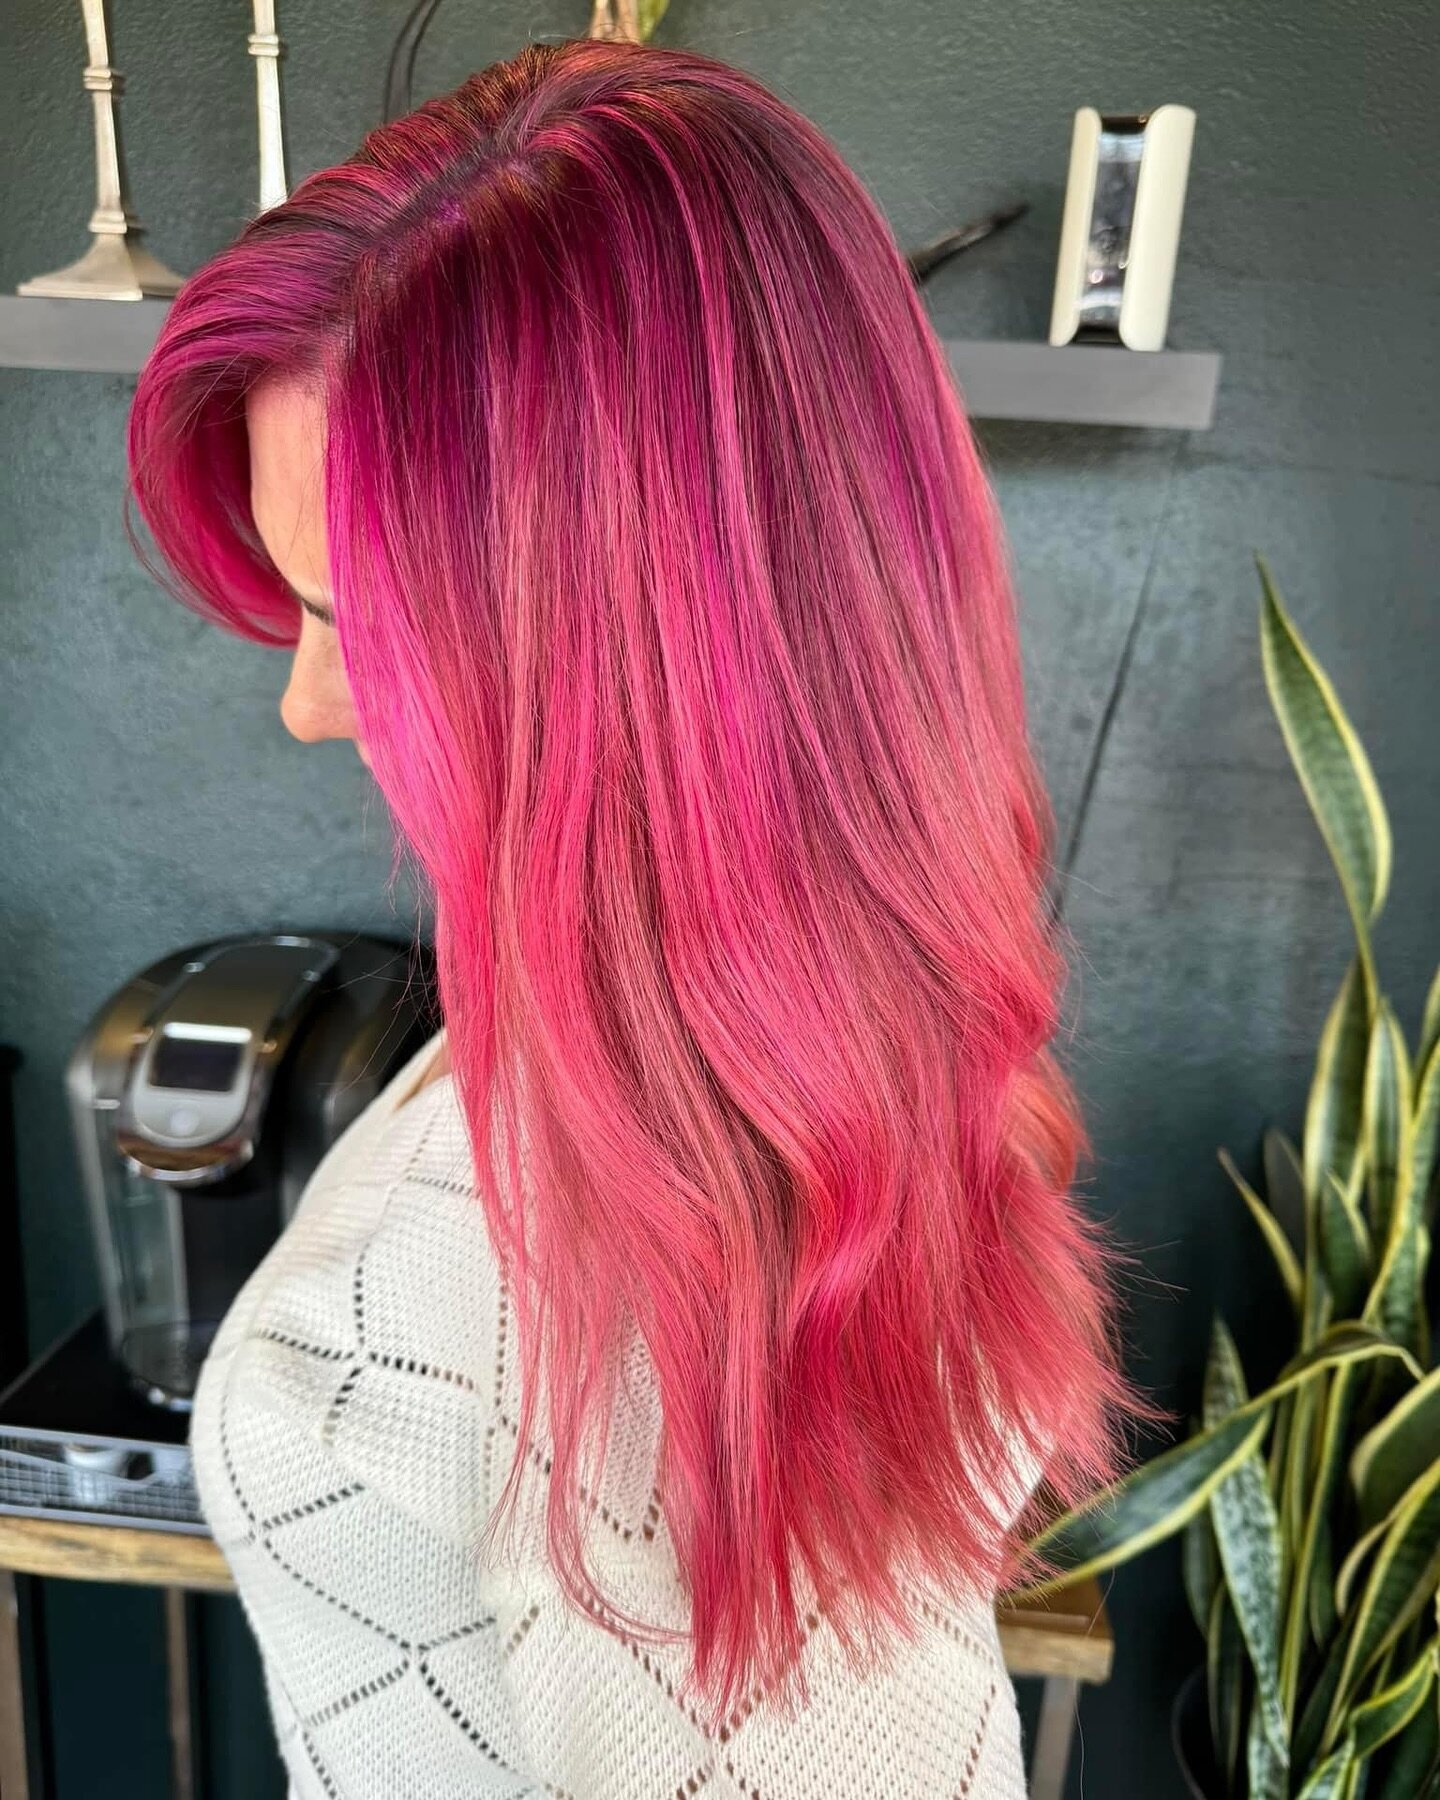 Oh don&rsquo;t mind us, just living out our Spring Fantasies over here🌷

Gorgeous hair done by our one and only Suzie!! The boss lady never disappoints when it comes to creating stunning hair🫶

-
-
-
Call 505/883/9707 to book today!
#vividhaircolor